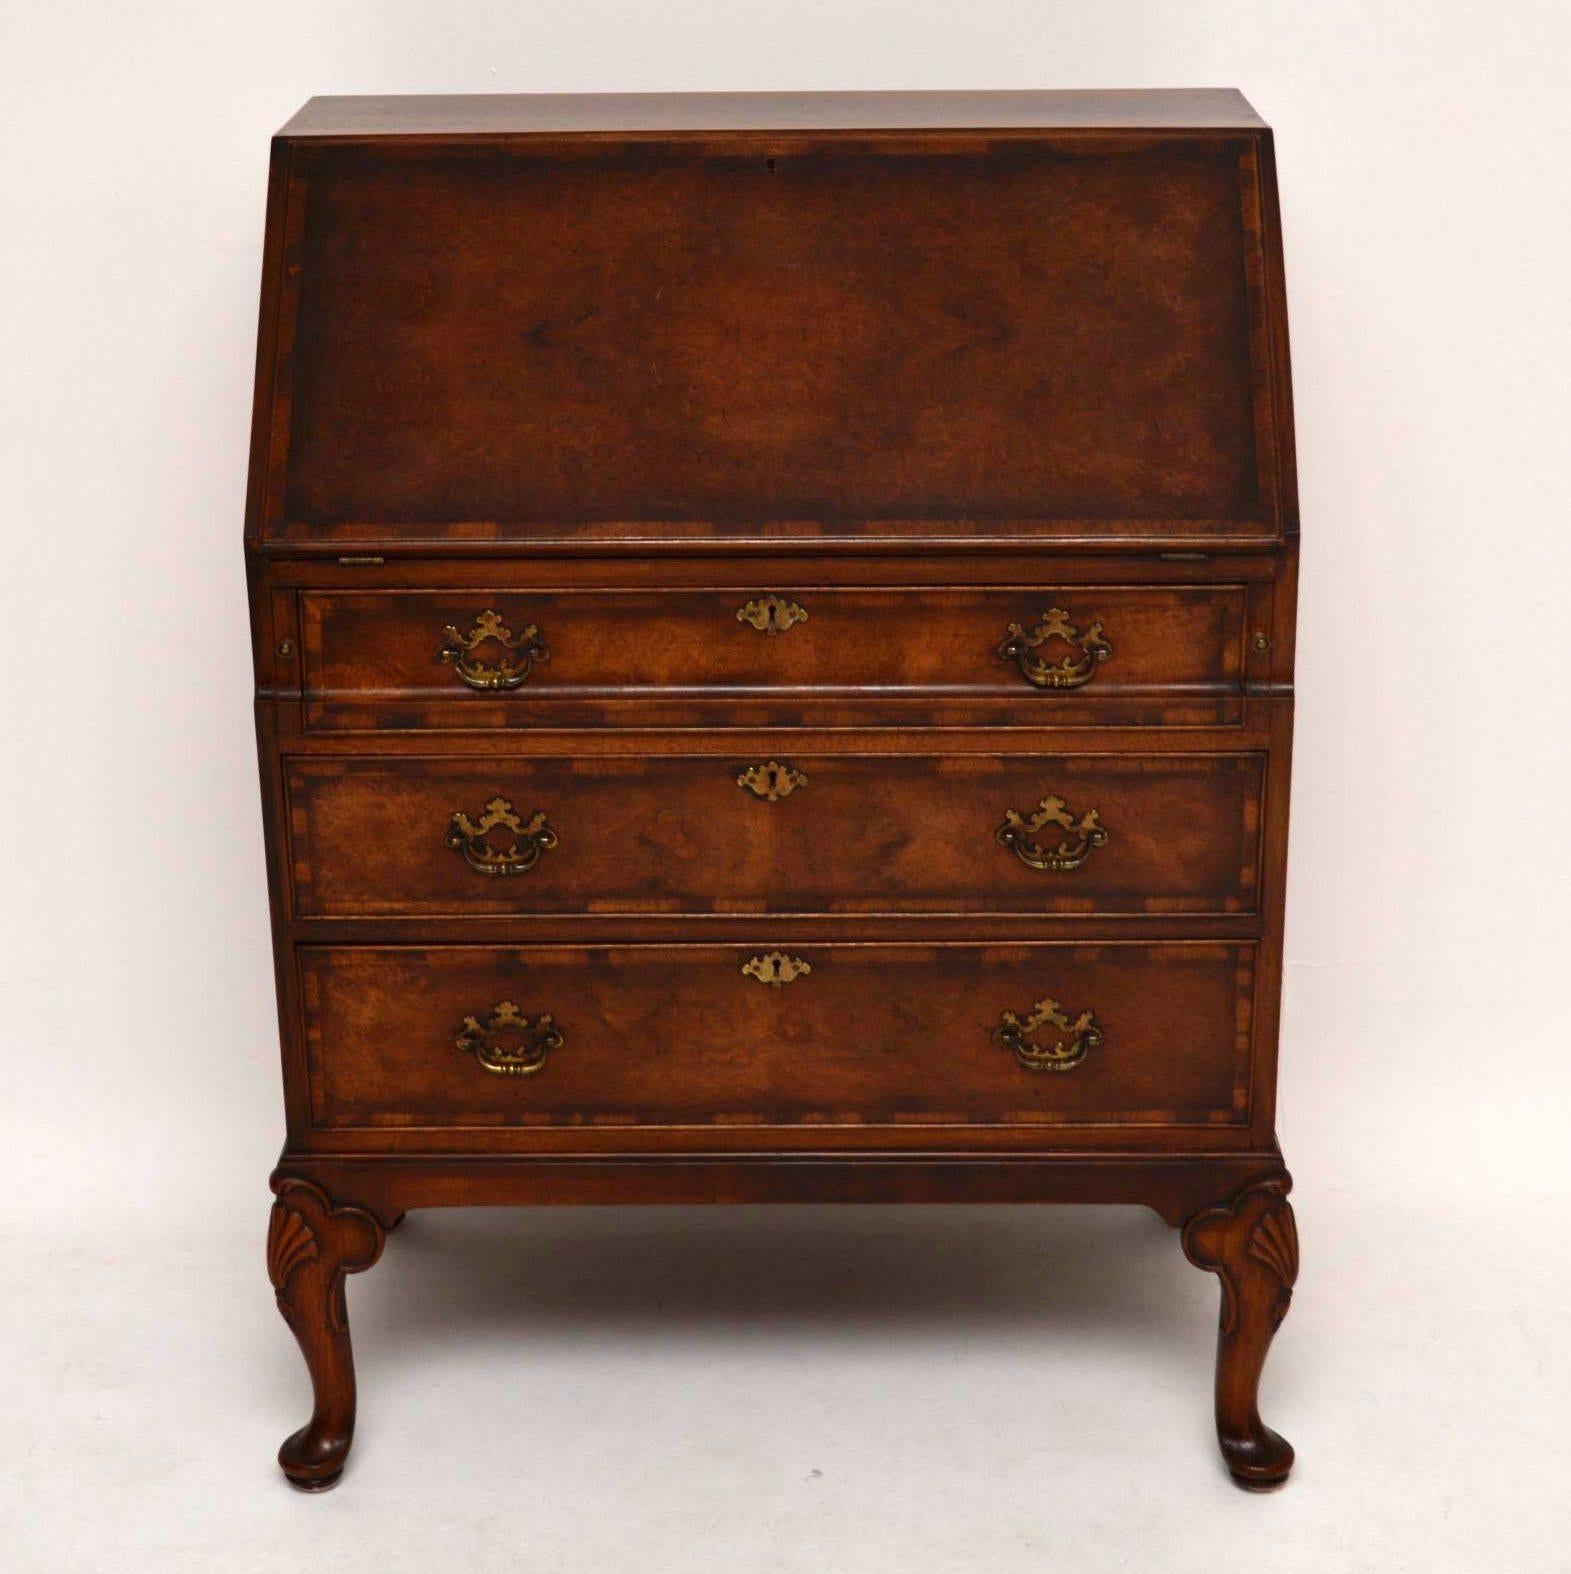 This antique burr walnut bureau is very high quality, so not surprisingly it was made by 'Waring & Gillows' and still bears the metal label. The burr walnut veneers are stunning & give off wonderful patterns, plus rich colours. The pull down slope